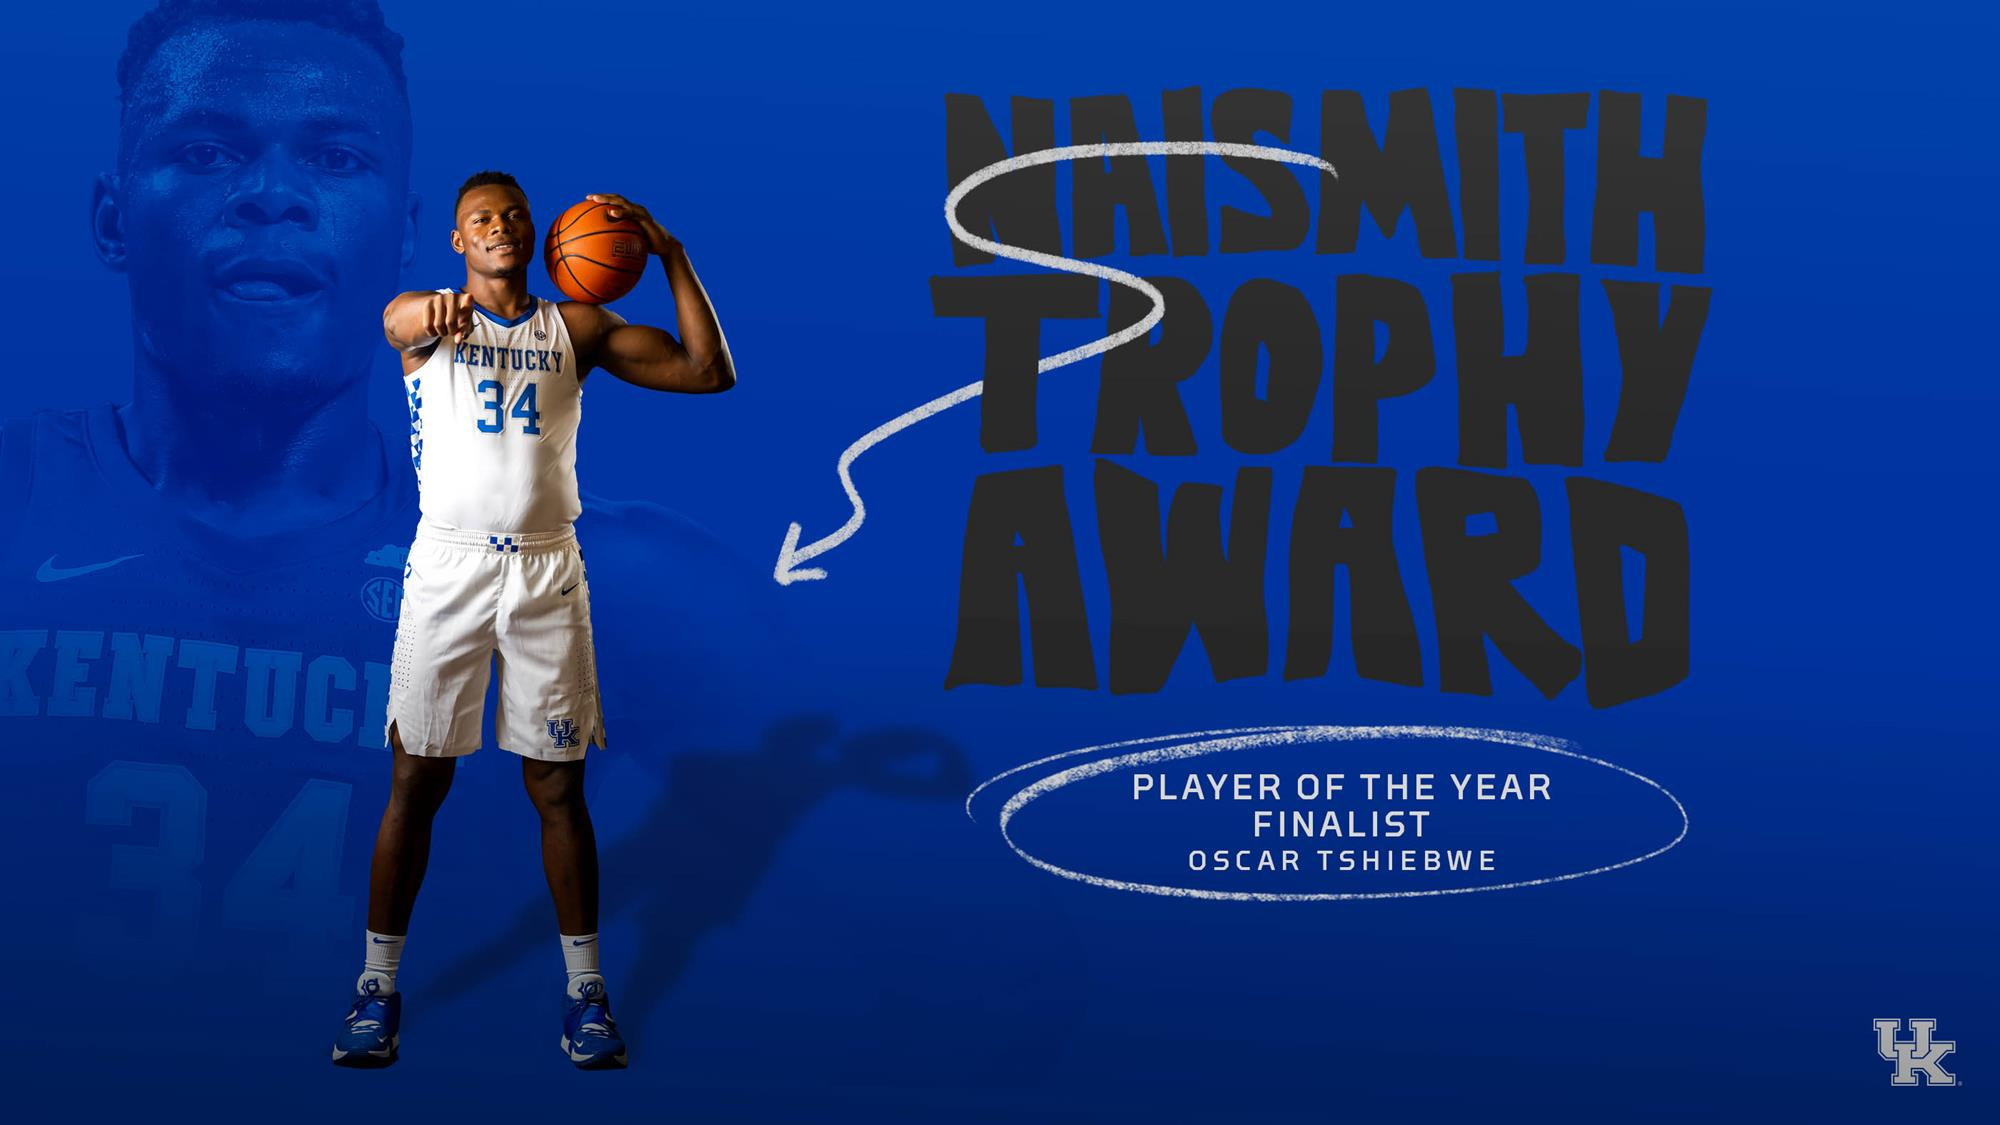 Oscar Tshiebwe a Finalist for Naismith Player of the Year